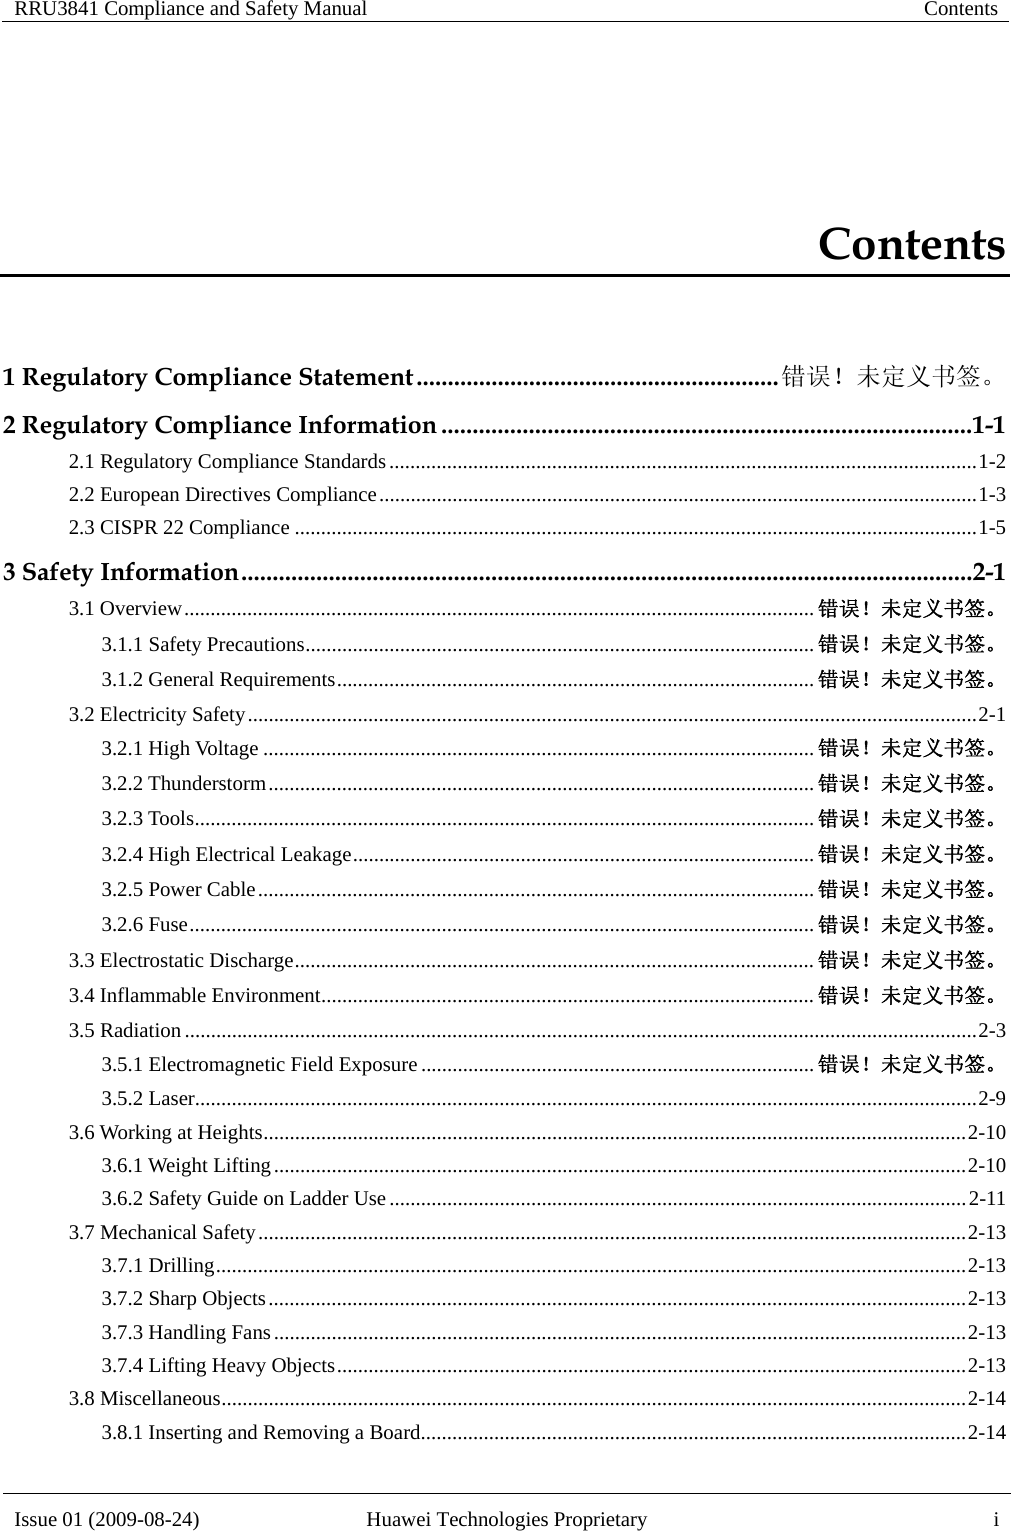 RRU3841 Compliance and Safety Manual  Contents  Issue 01 (2009-08-24)  Huawei Technologies Proprietary  i Contents 1 Regulatory Compliance Statement .......................................................... 错误！未定义书签。2 Regulatory Compliance Information ..................................................................................... 1-12.1 Regulatory Compliance Standards ................................................................................................................ 1-22.2 European Directives Compliance .................................................................................................................. 1-32.3 CISPR 22 Compliance .................................................................................................................................. 1-53 Safety Information ..................................................................................................................... 2-13.1 Overview ........................................................................................................................ 错误！未定义书签。3.1.1 Safety Precautions ................................................................................................. 错误！未定义书签。3.1.2 General Requirements ........................................................................................... 错误！未定义书签。3.2 Electricity Safety ........................................................................................................................................... 2-13.2.1 High Voltage ......................................................................................................... 错误！未定义书签。3.2.2 Thunderstorm ........................................................................................................ 错误！未定义书签。3.2.3 Tools ...................................................................................................................... 错误！未定义书签。3.2.4 High Electrical Leakage ........................................................................................ 错误！未定义书签。3.2.5 Power Cable .......................................................................................................... 错误！未定义书签。3.2.6 Fuse ....................................................................................................................... 错误！未定义书签。3.3 Electrostatic Discharge ................................................................................................... 错误！未定义书签。3.4 Inflammable Environment .............................................................................................. 错误！未定义书签。3.5 Radiation ....................................................................................................................................................... 2-33.5.1 Electromagnetic Field Exposure ........................................................................... 错误！未定义书签。3.5.2 Laser..................................................................................................................................................... 2-93.6 Working at Heights ...................................................................................................................................... 2-103.6.1 Weight Lifting .................................................................................................................................... 2-103.6.2 Safety Guide on Ladder Use .............................................................................................................. 2-113.7 Mechanical Safety ....................................................................................................................................... 2-133.7.1 Drilling ............................................................................................................................................... 2-133.7.2 Sharp Objects ..................................................................................................................................... 2-133.7.3 Handling Fans .................................................................................................................................... 2-133.7.4 Lifting Heavy Objects ........................................................................................................................ 2-133.8 Miscellaneous .............................................................................................................................................. 2-143.8.1 Inserting and Removing a Board ........................................................................................................ 2-14